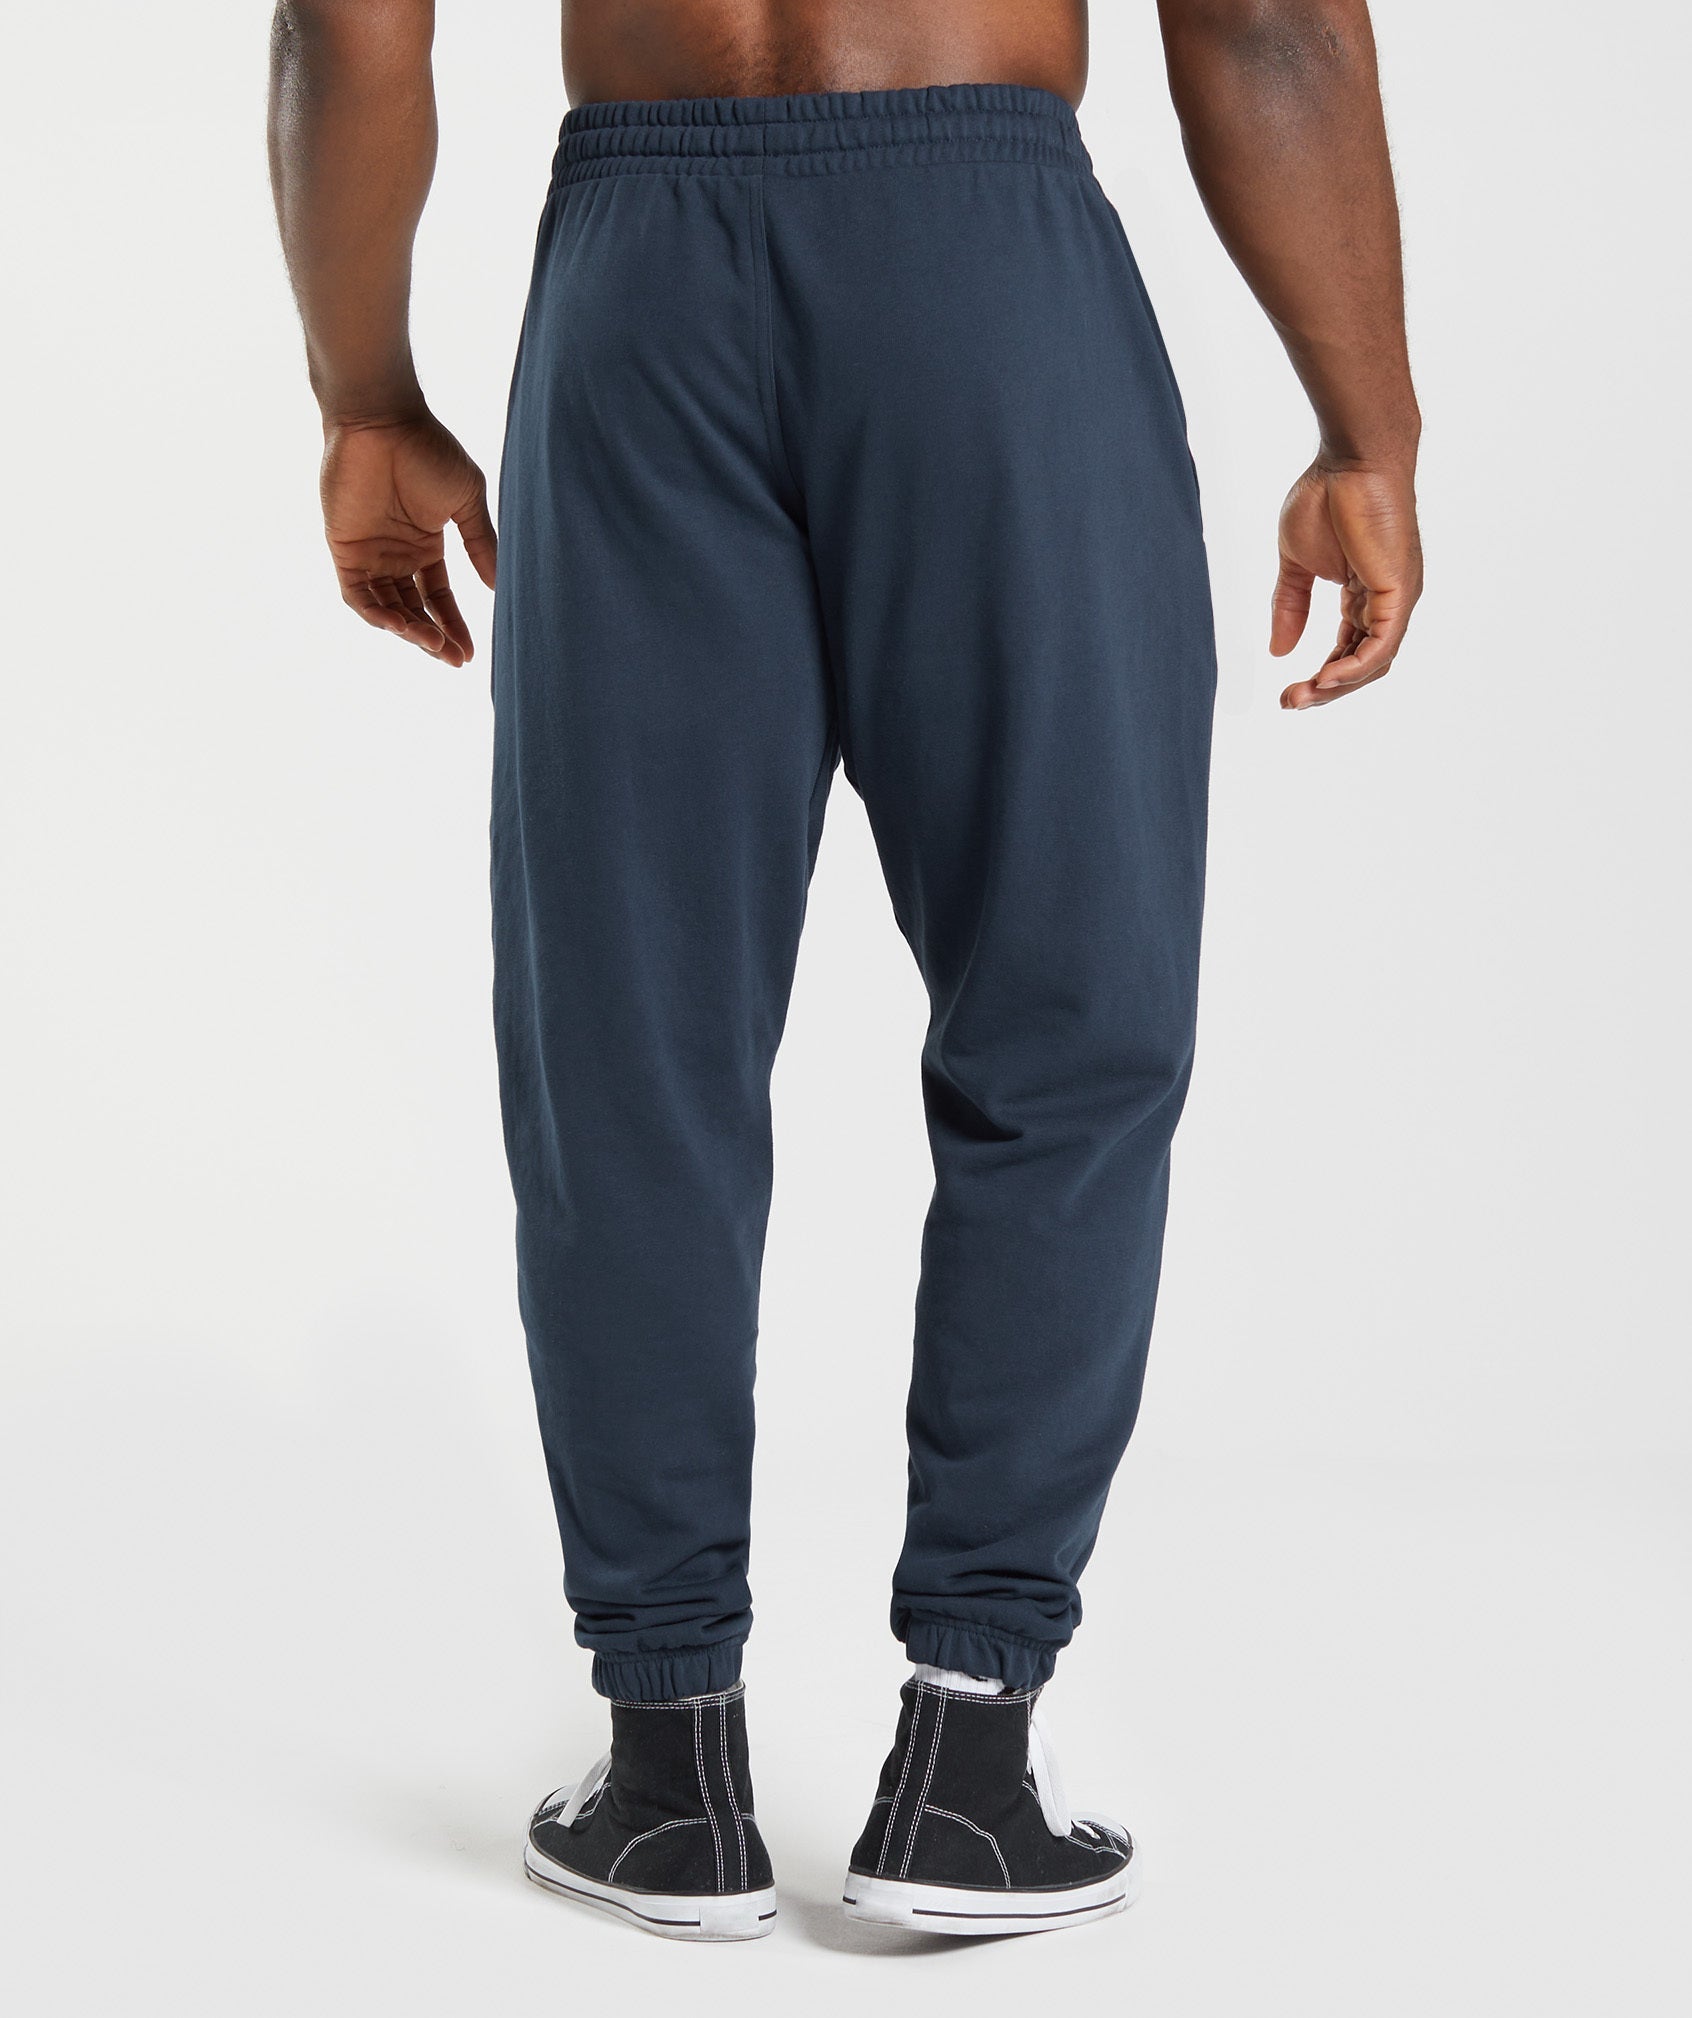 React Joggers in Navy - view 2